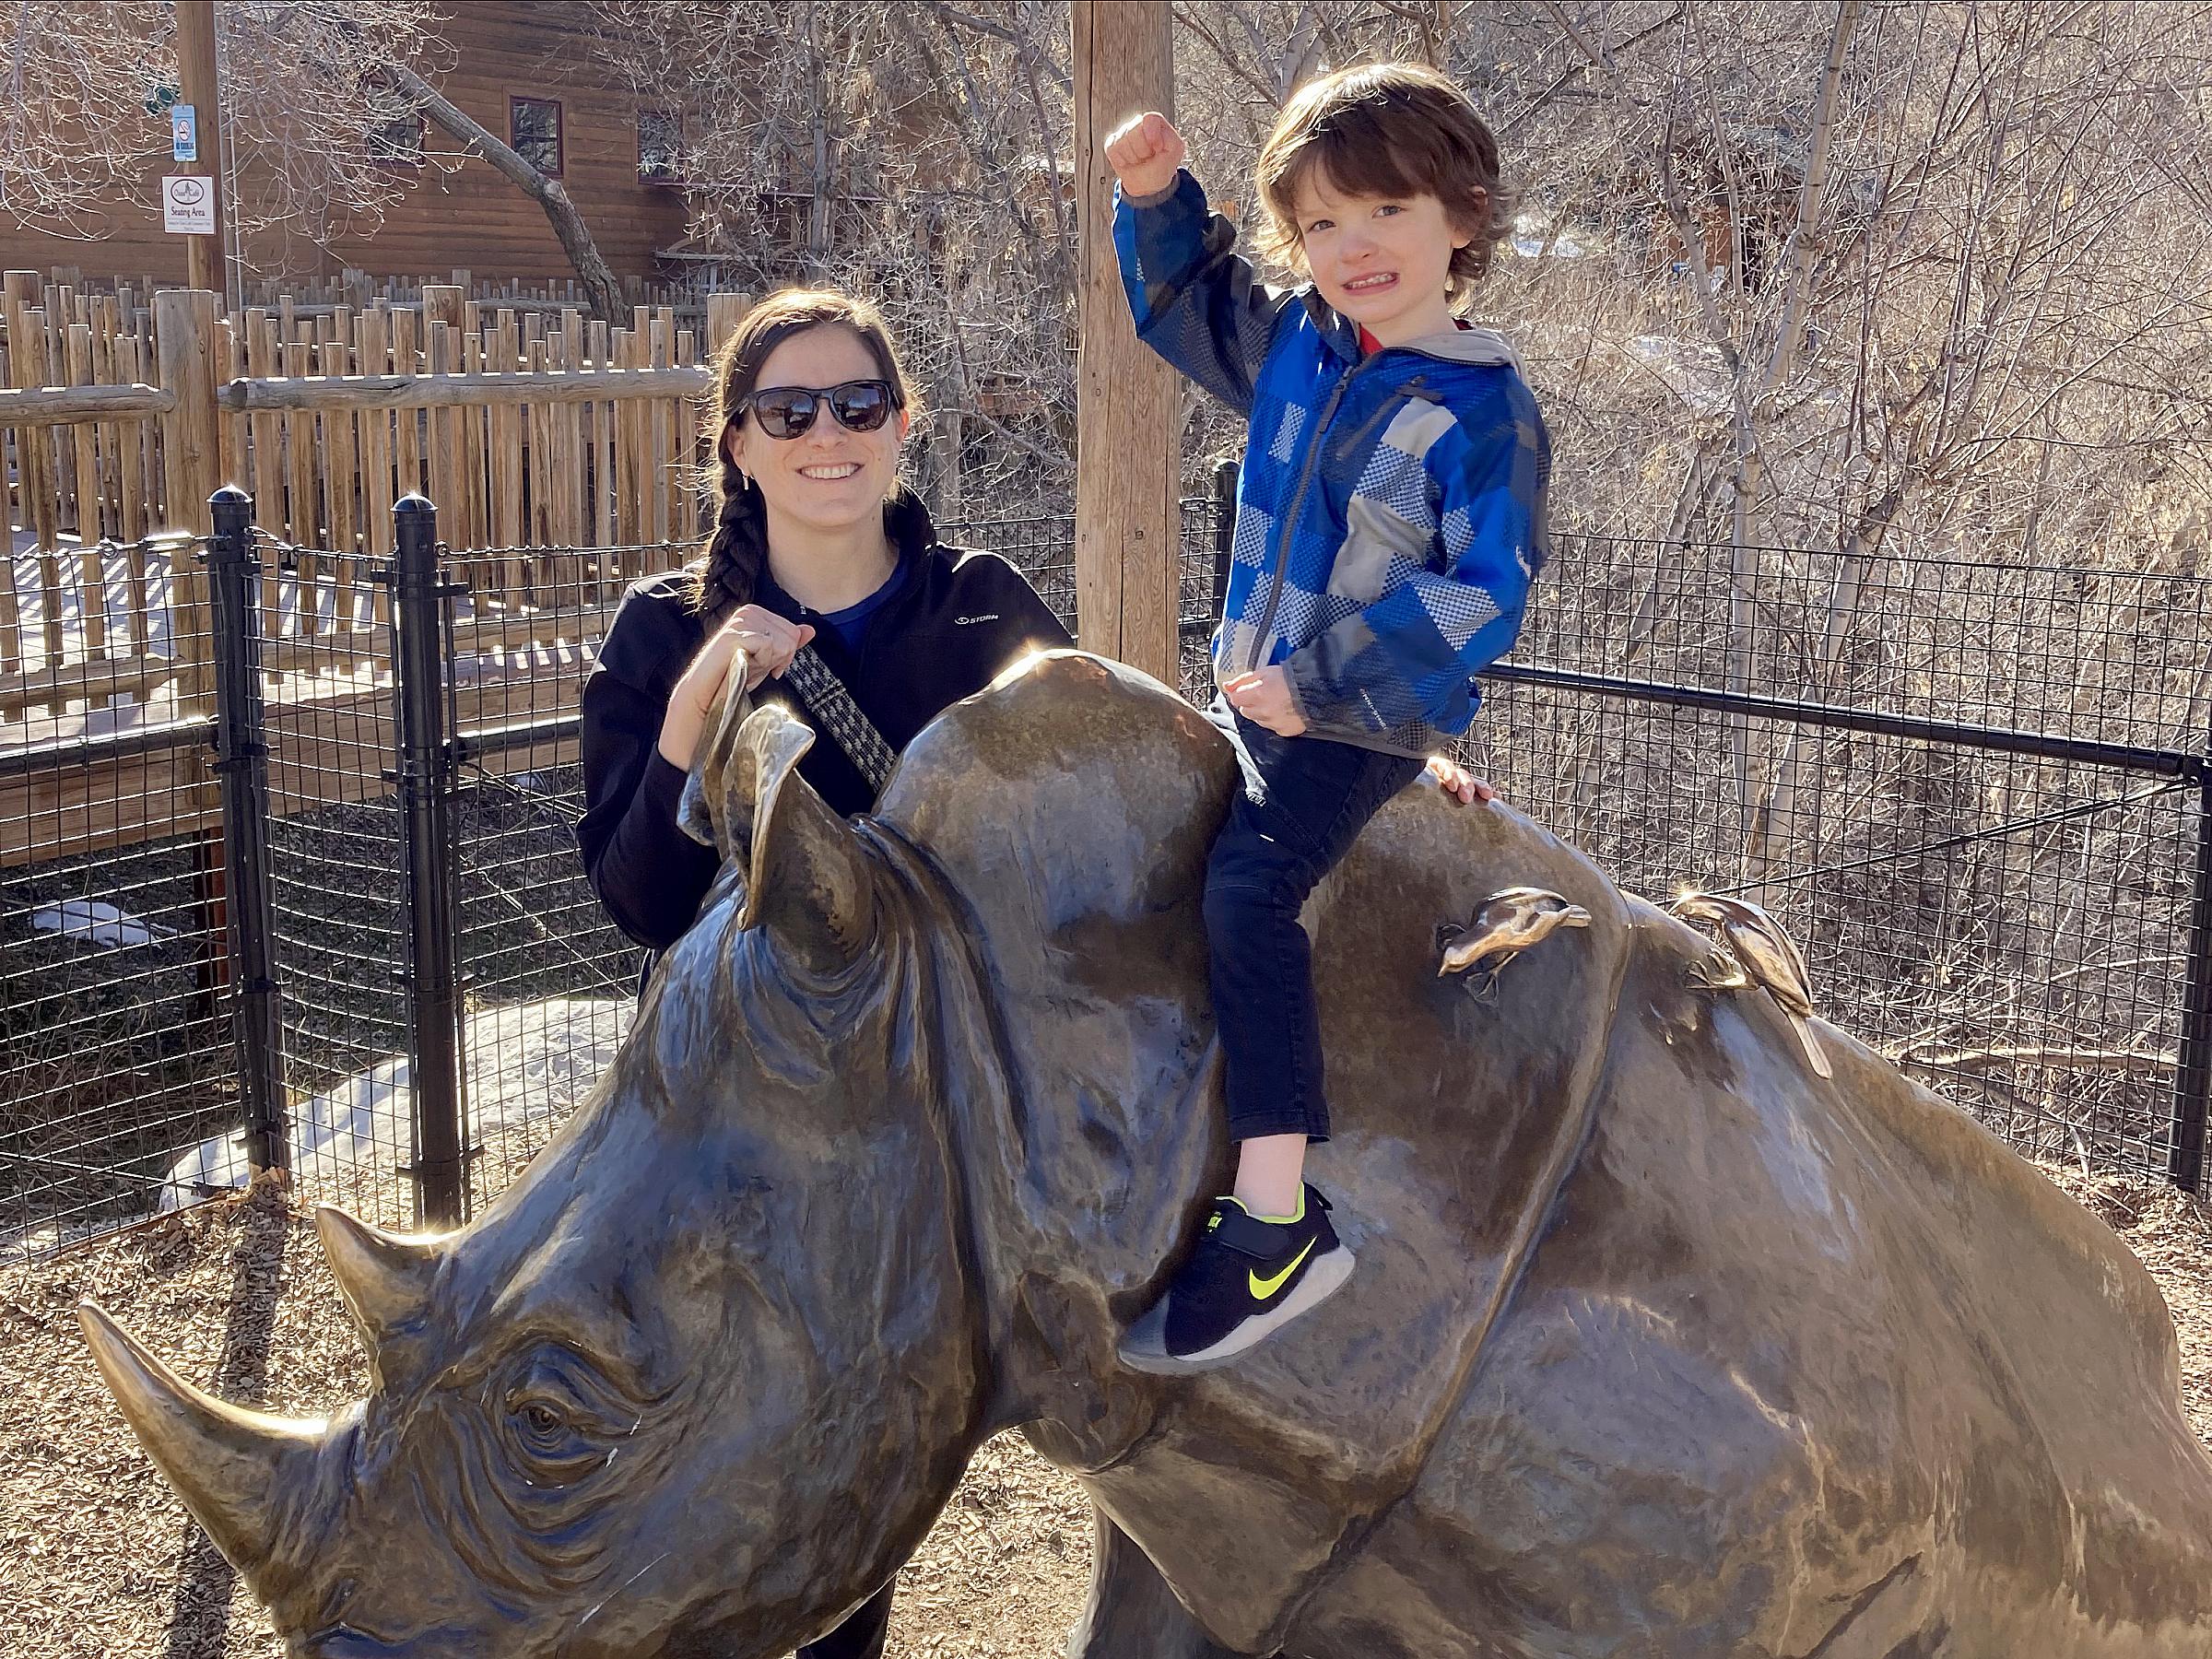 Jenny and her son Dillon stopped at Hogle Zoo while they were in Salt Lake City for their most recent screening appointment at Huntsman Cancer Institute